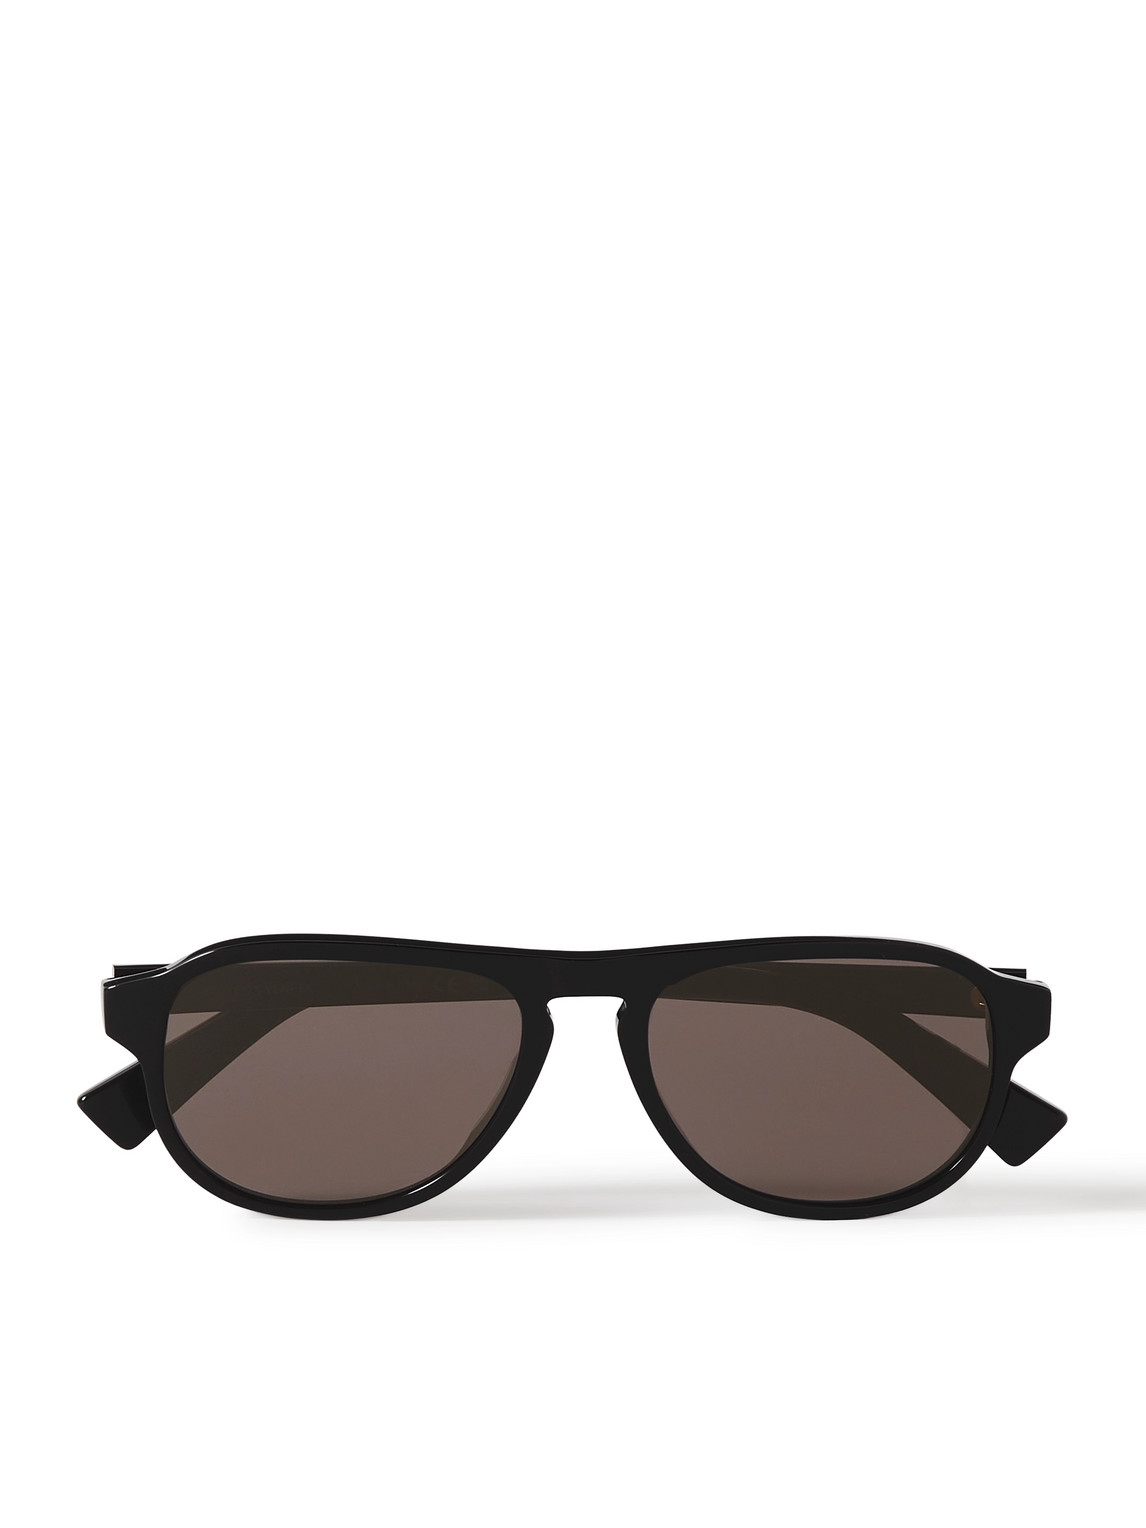 Aviator-Style Recycled-Acetate Sunglasses